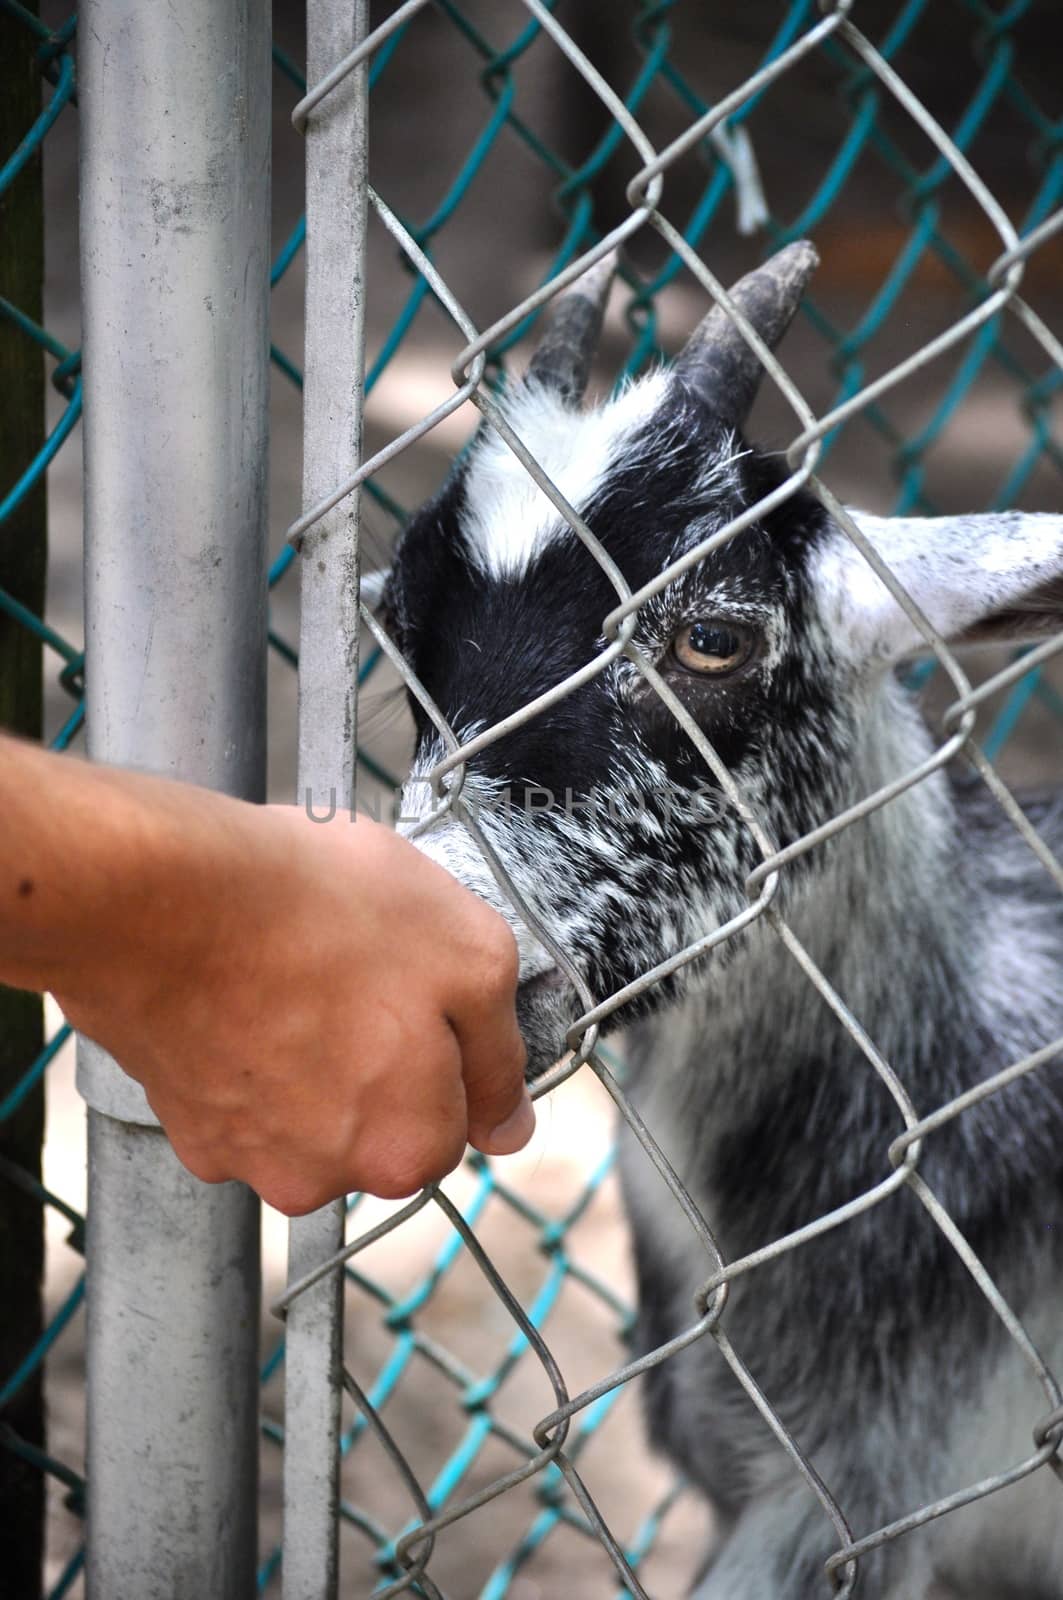 Goat eats through fence by RefocusPhoto